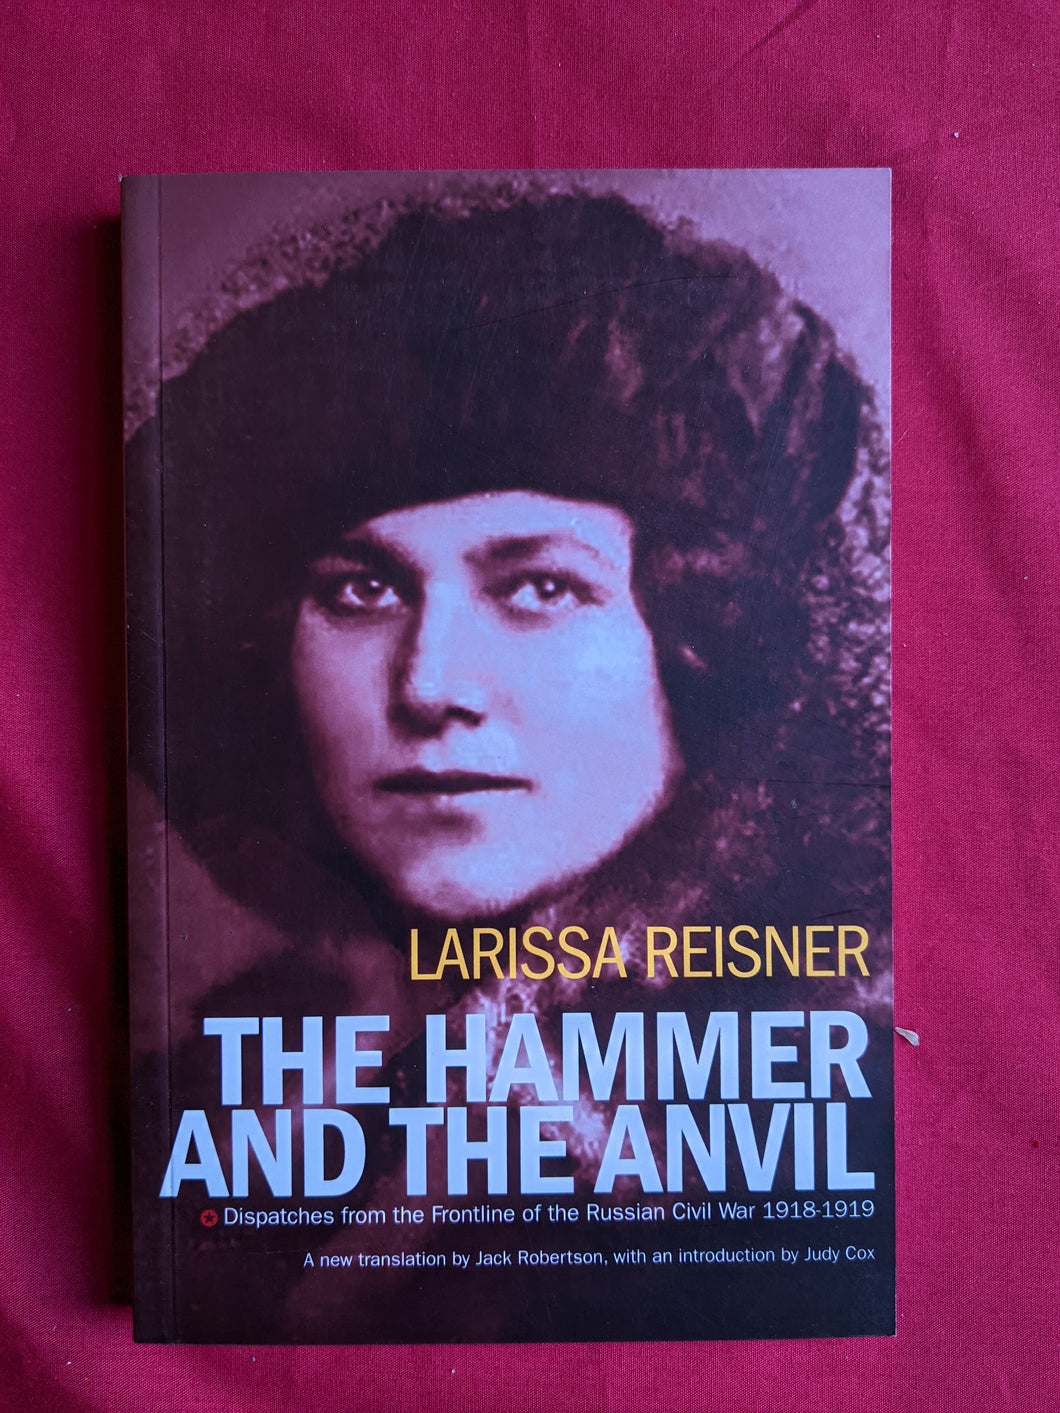 The Hammer and the Anvil - Dispatches from the Frontlines of the Russian Civil War